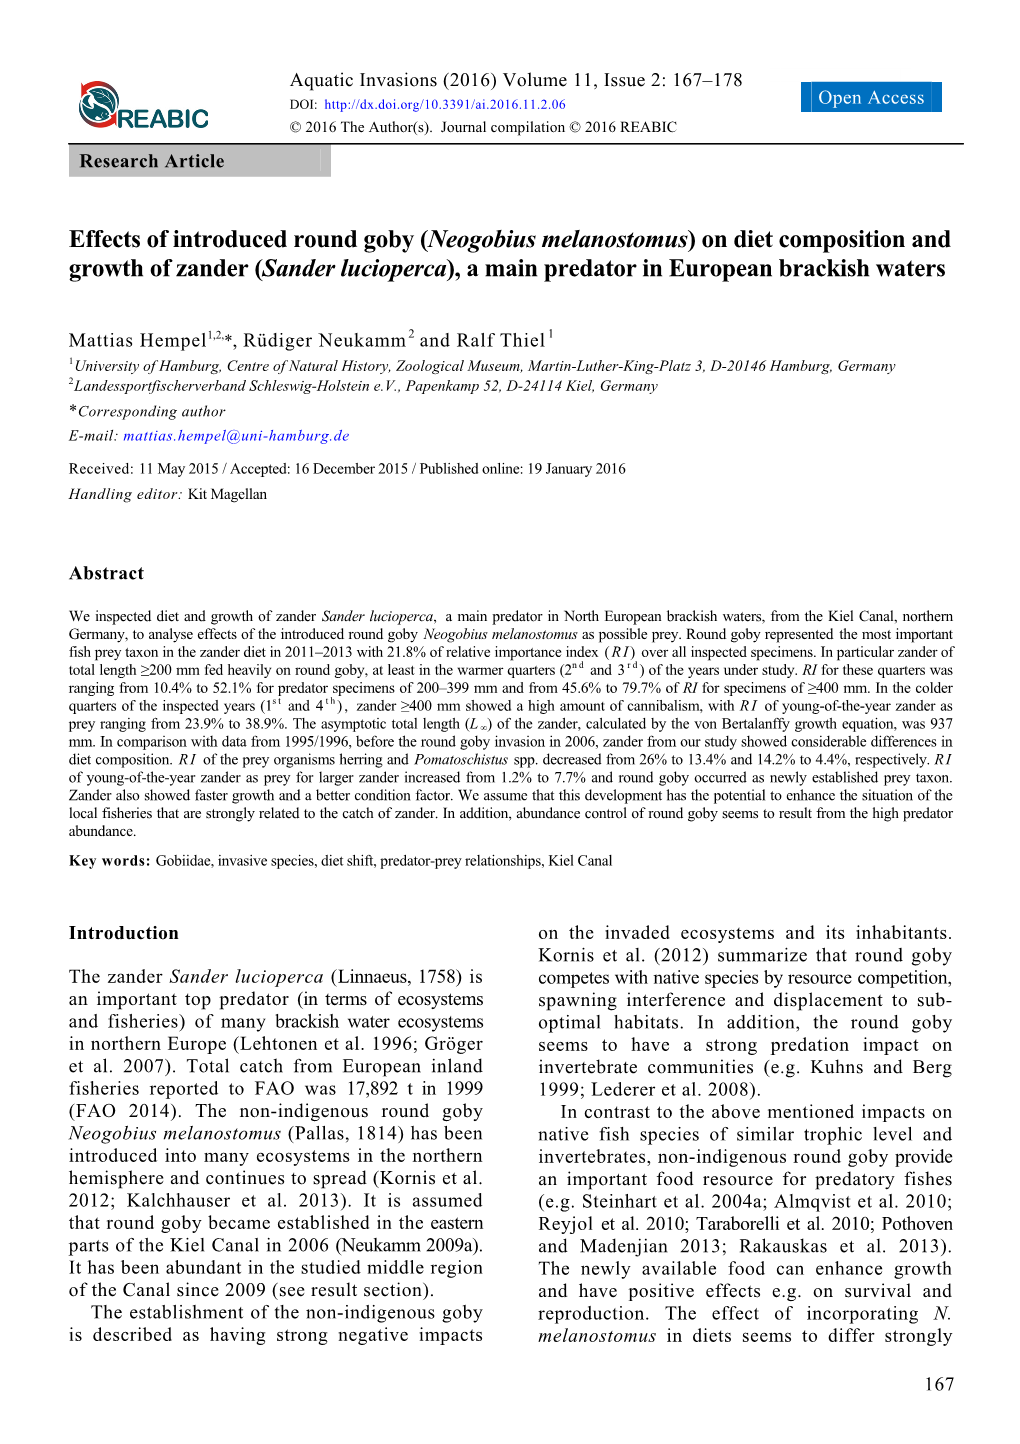 Effects of Introduced Round Goby (Neogobius Melanostomus) on Diet Composition and Growth of Zander (Sander Lucioperca), a Main Predator in European Brackish Waters